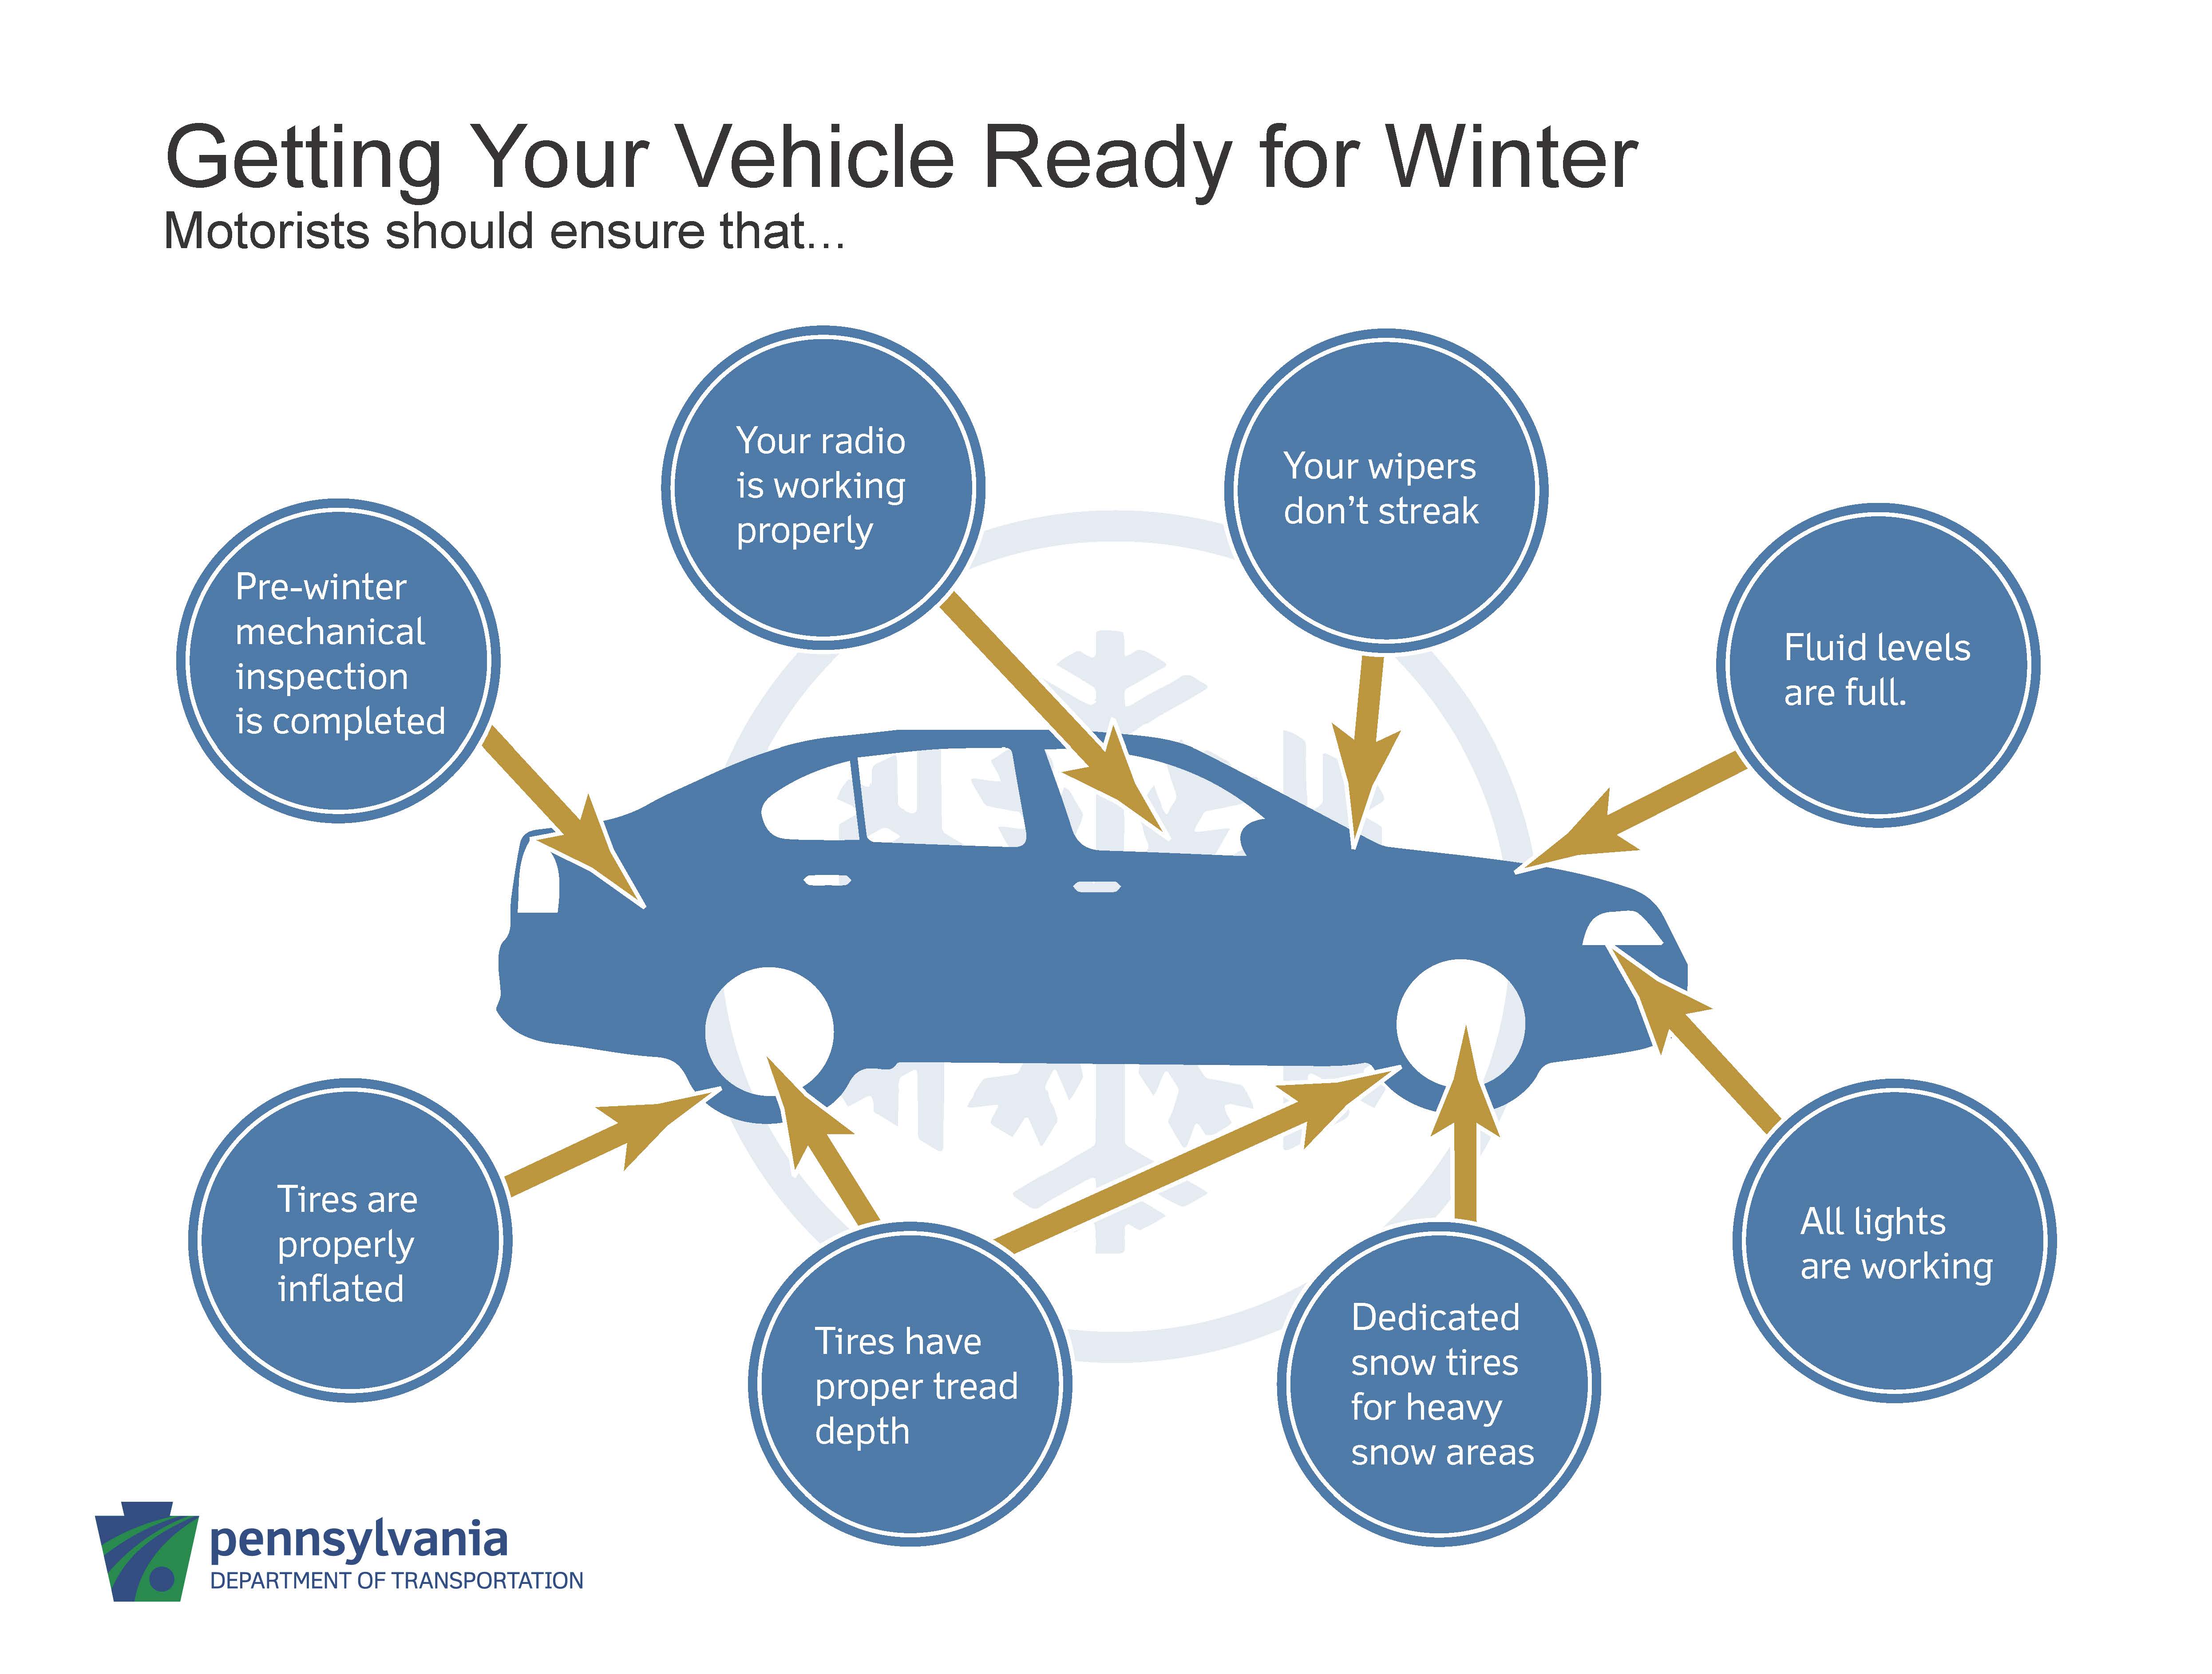 Winter driving checklist can make the difference - OPPD - The Wire